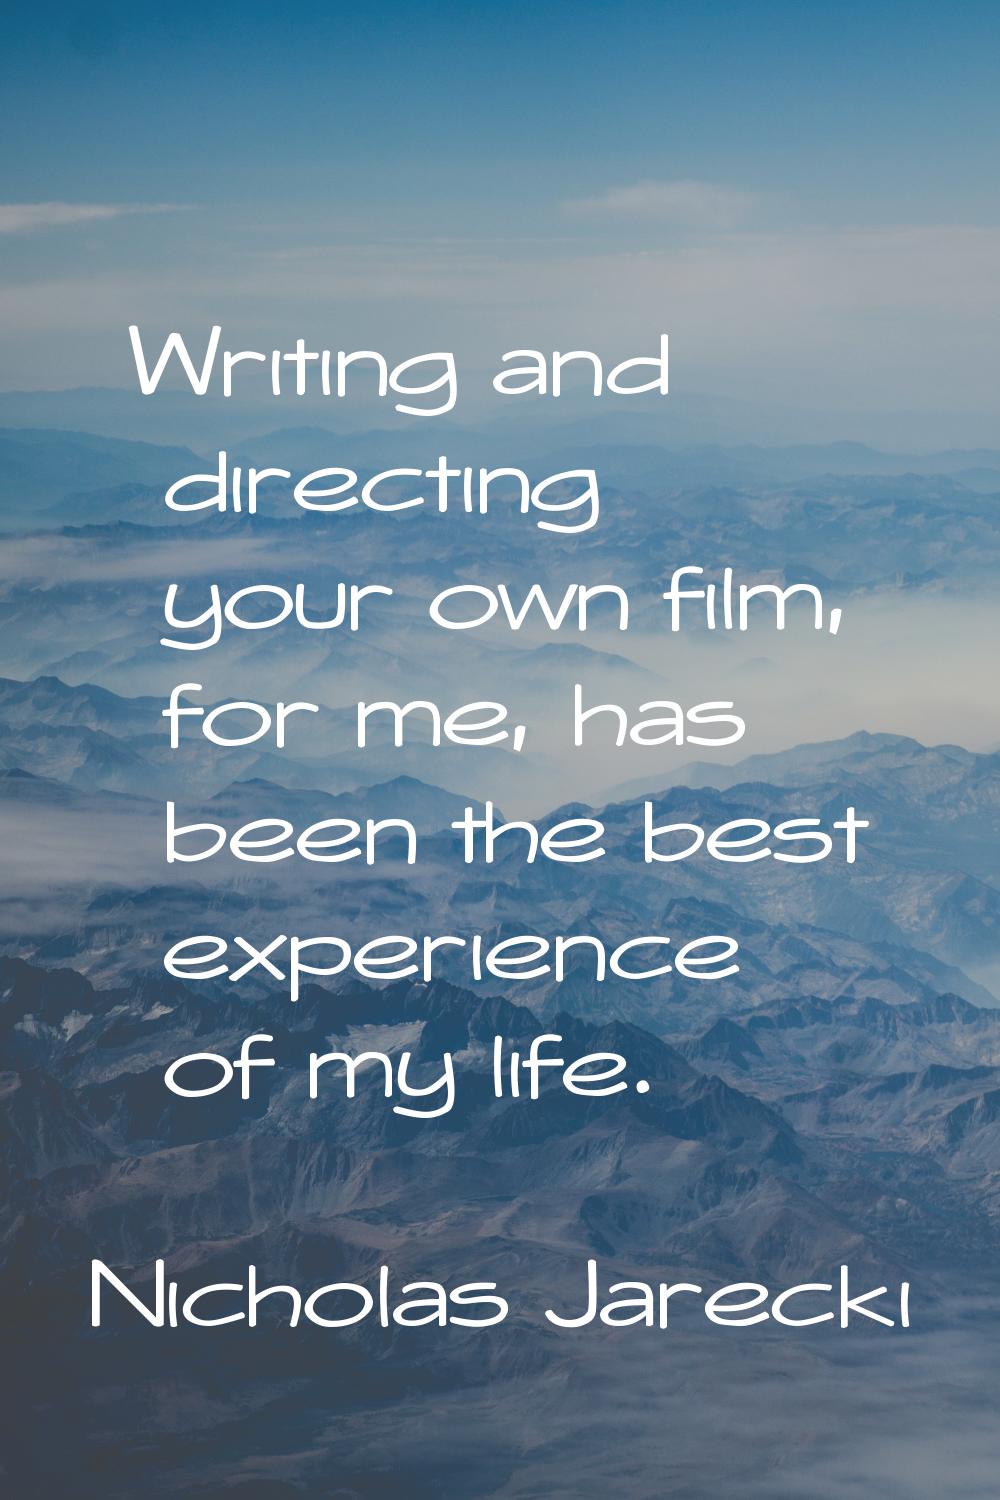 Writing and directing your own film, for me, has been the best experience of my life.